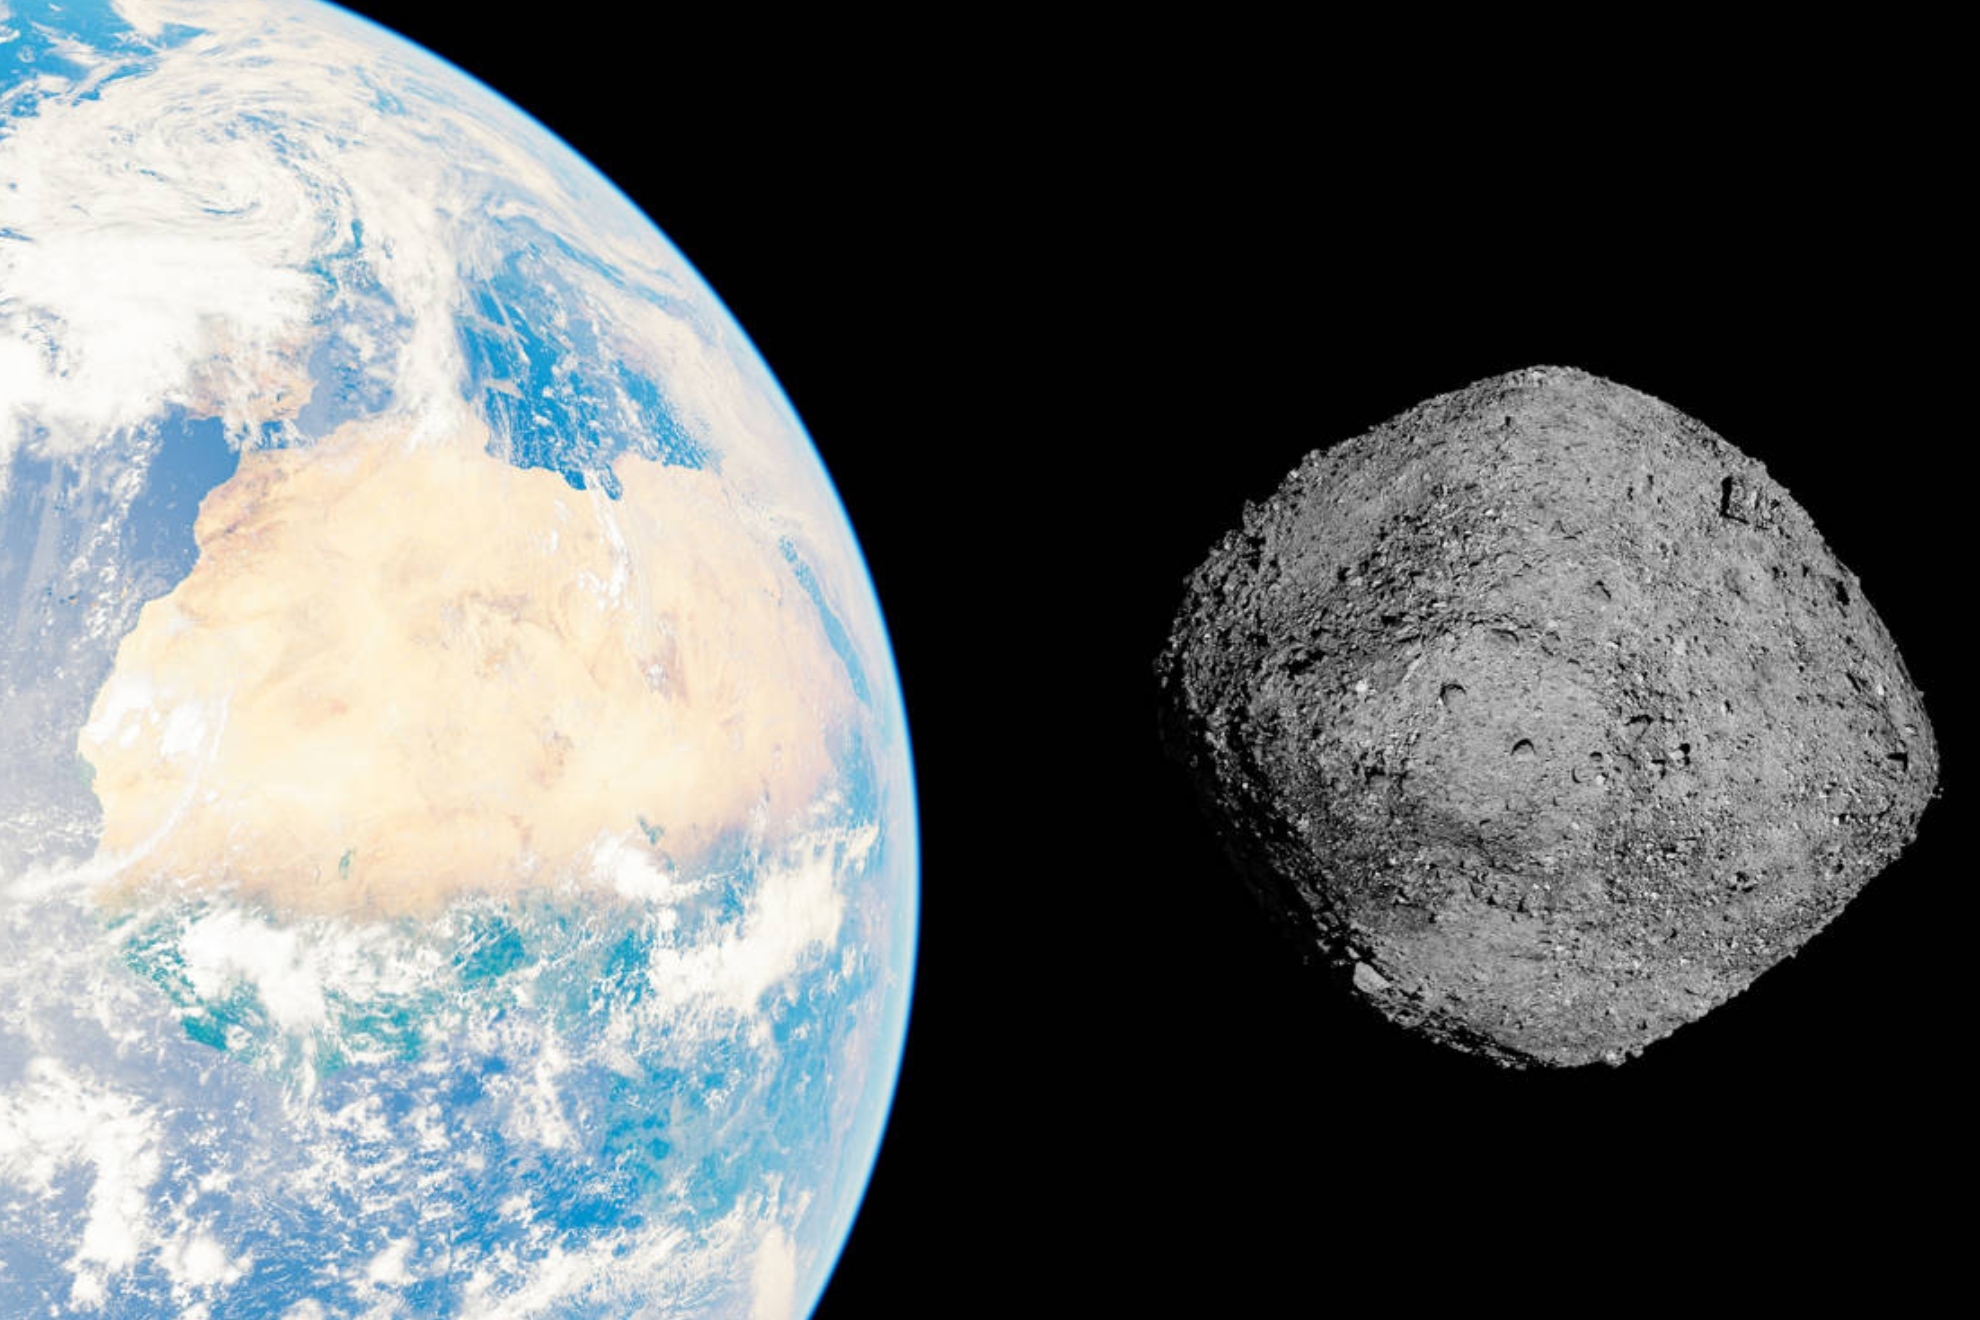 NASA asks Vatican for help in asteroid analysis